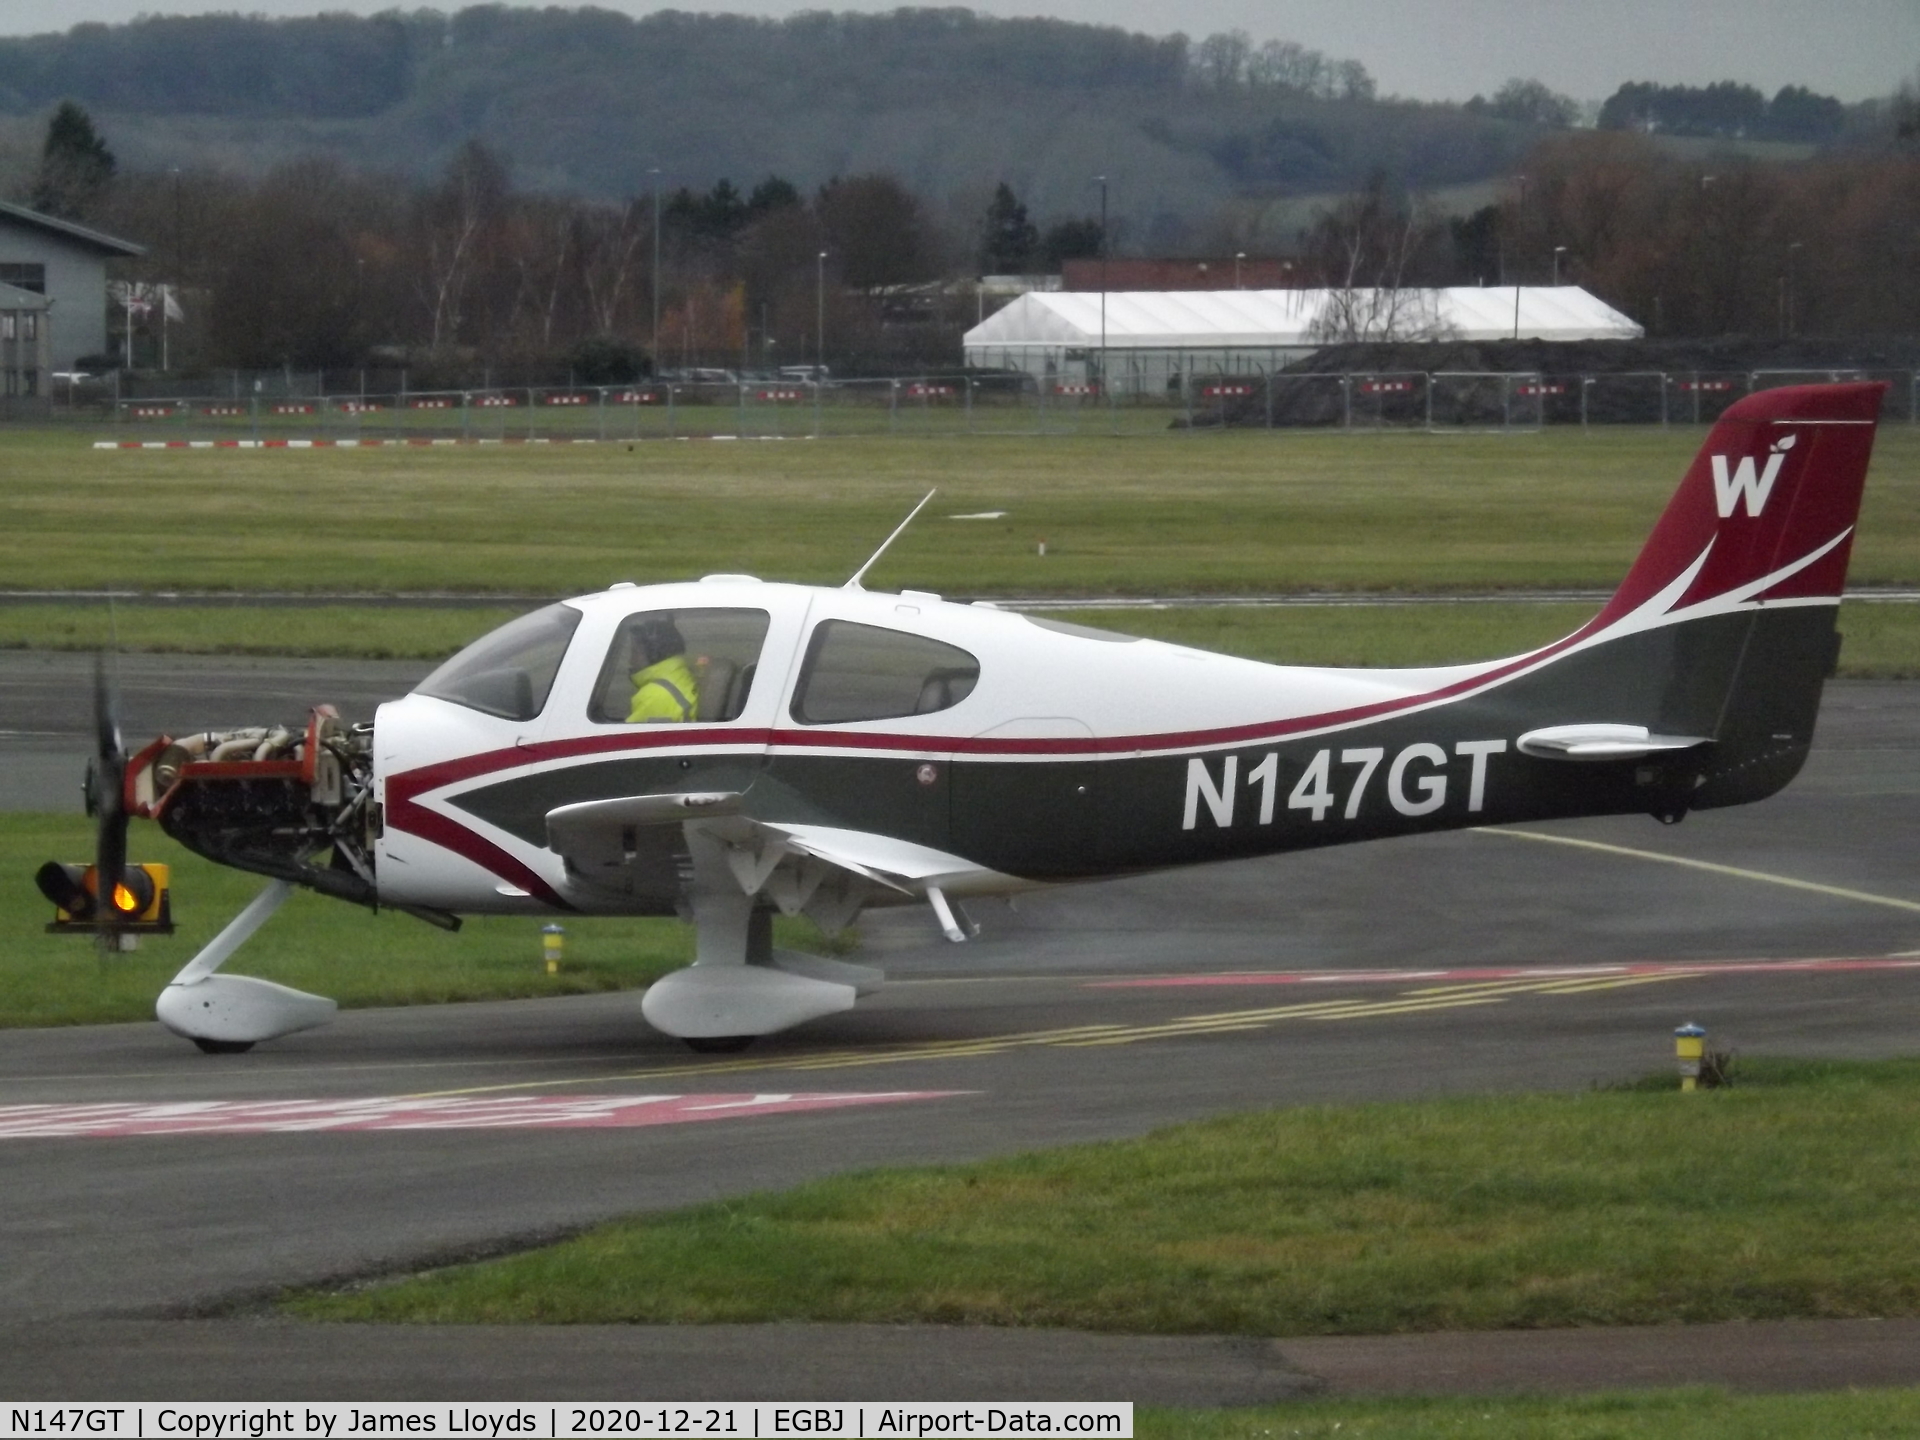 N147GT, 2004 Cirrus SR22 G2 C/N 1069, Seen with a new paint Job at Gloucestershire Airport.